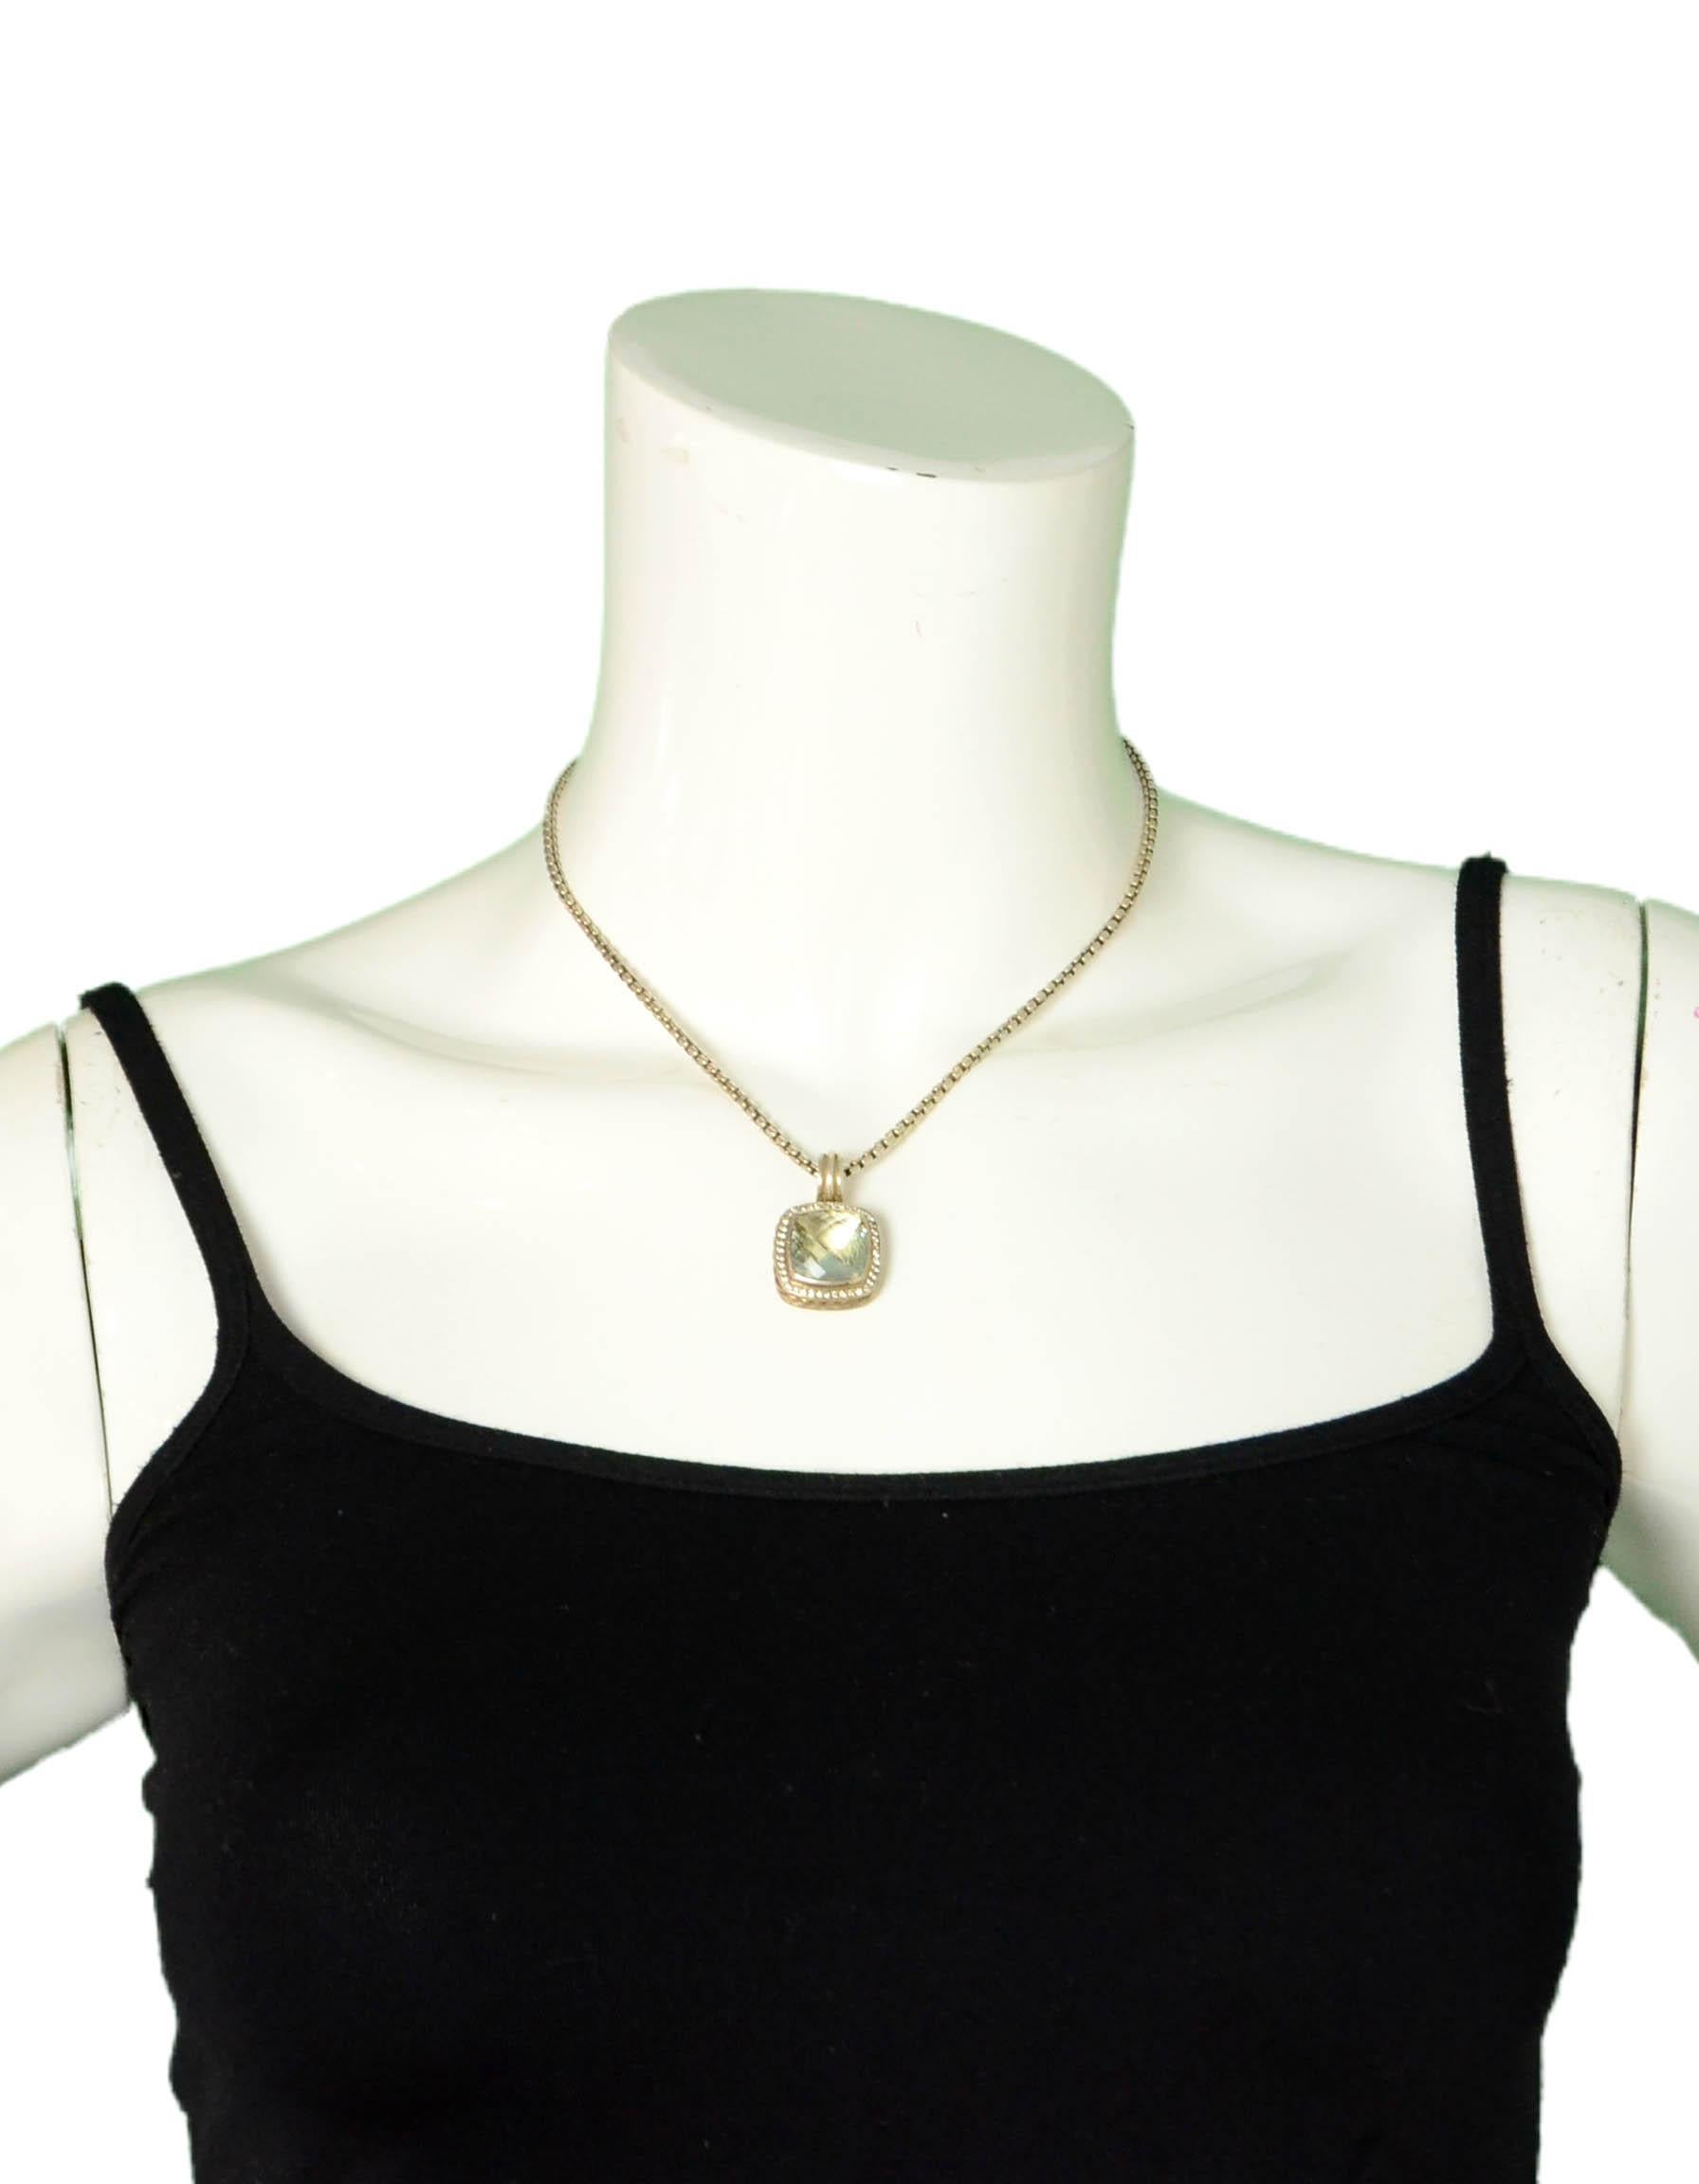 David Yurman Sterling Silver Prasiolite & Diamond Albion Pendant Necklace

Materials: Sterling silver, parsiolite, diamond
Hallmarks: DY 925
Closure/Opening: Lobster
Overall Condition: Excellent pre-owned condition
Estimated Retail: $1,550
Includes: